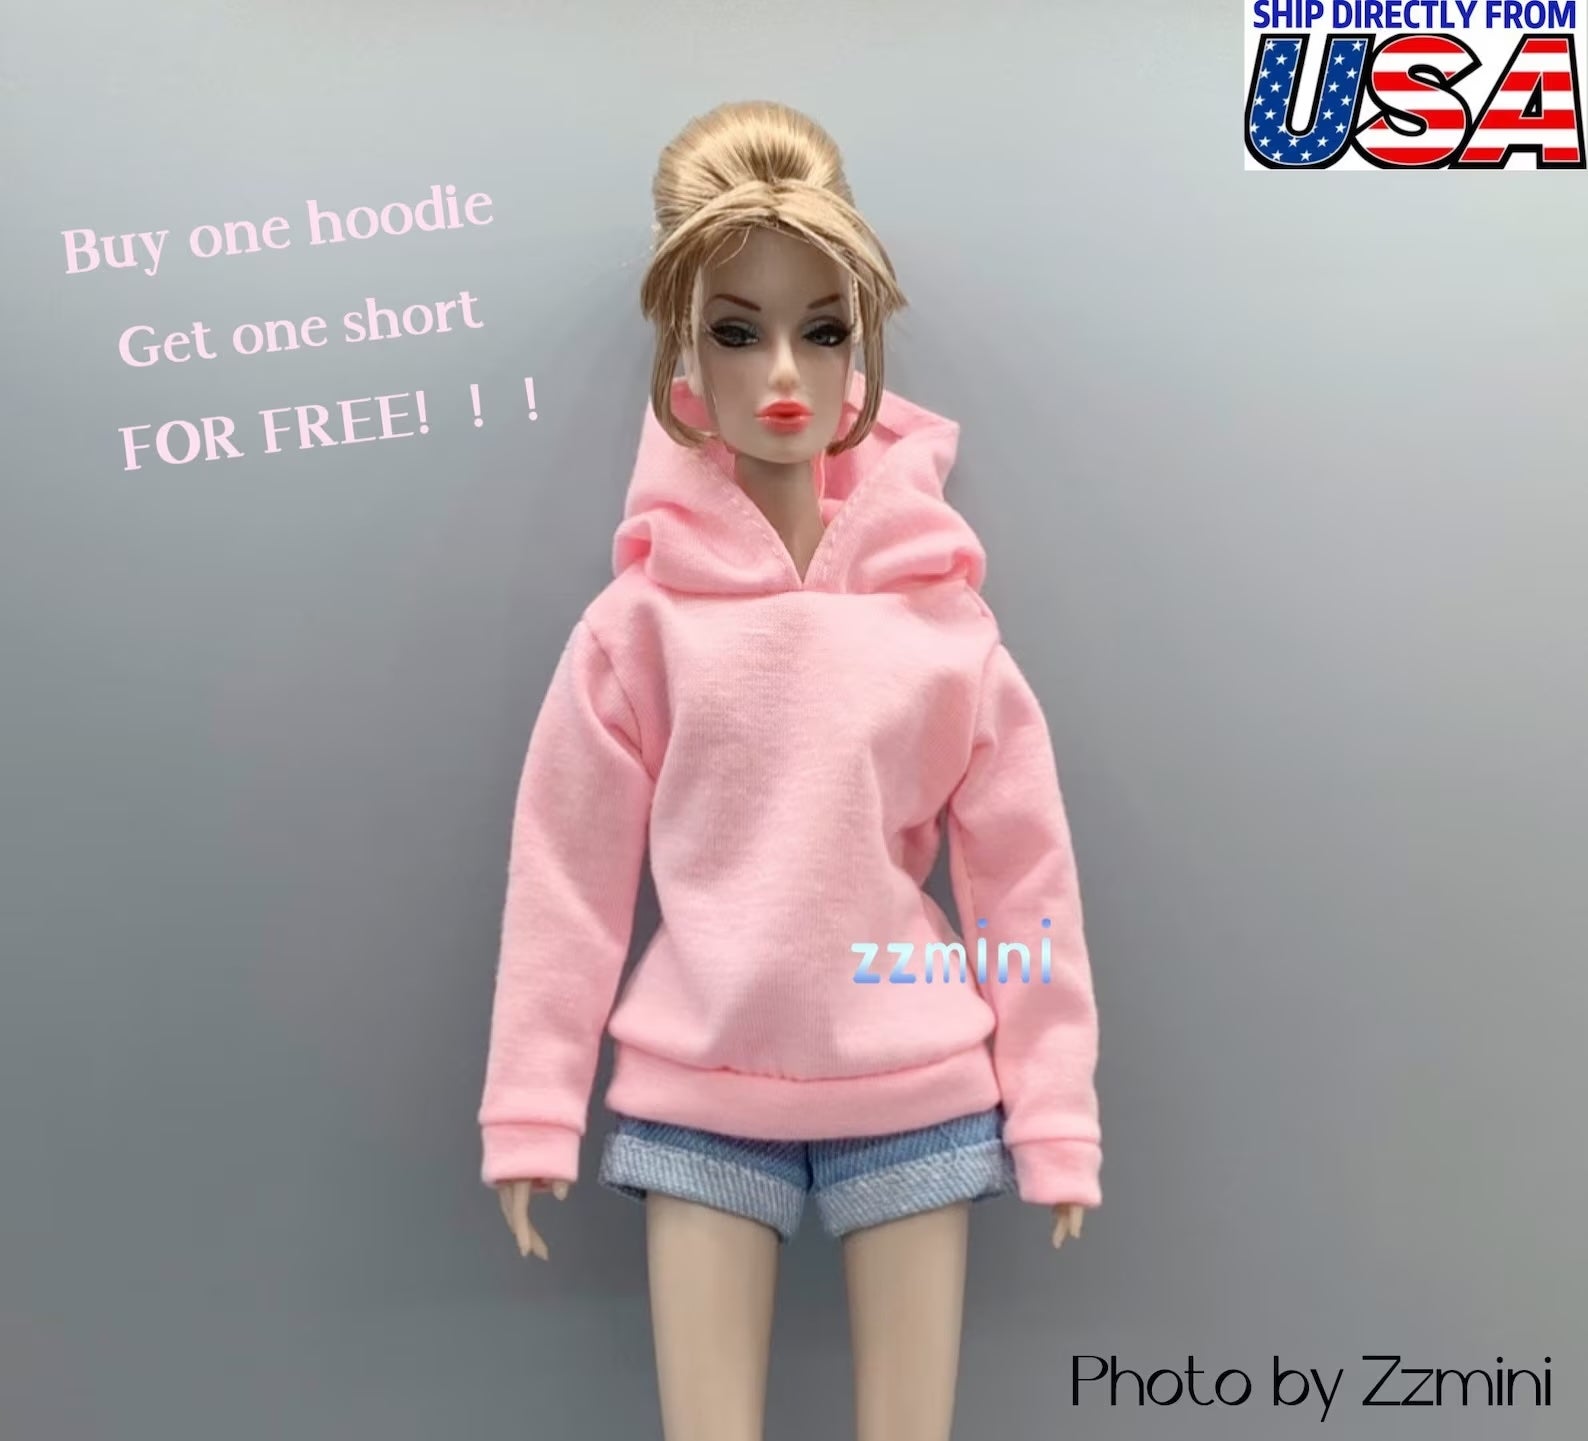 Handmade Pink Hoodie For 11.5inch Fashion Doll Princess Top Doll Clothes 1/6 Toy